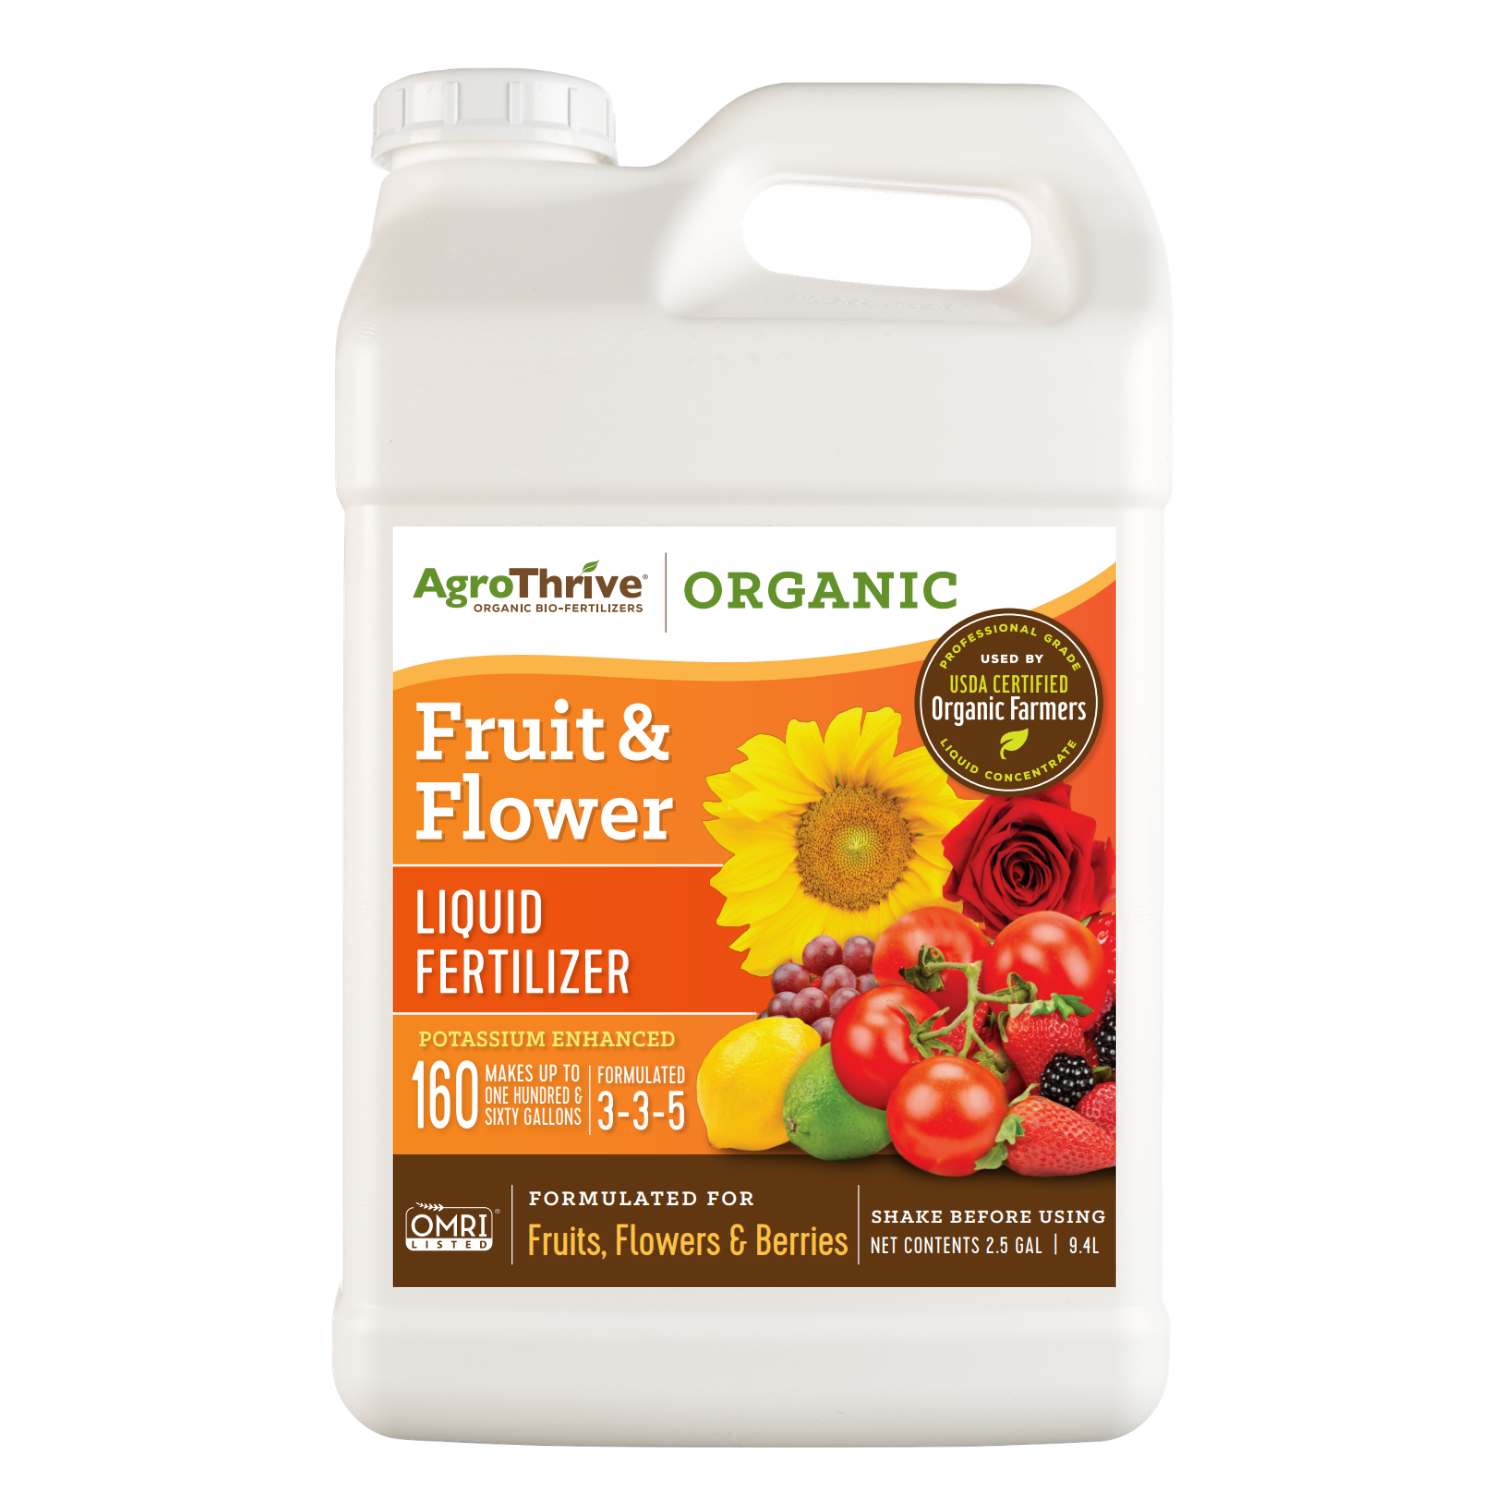 AgroThrive Organic Liquid Fertilizer | Fast Acting | For fruits, flowers, tomatoes, citrus, and more